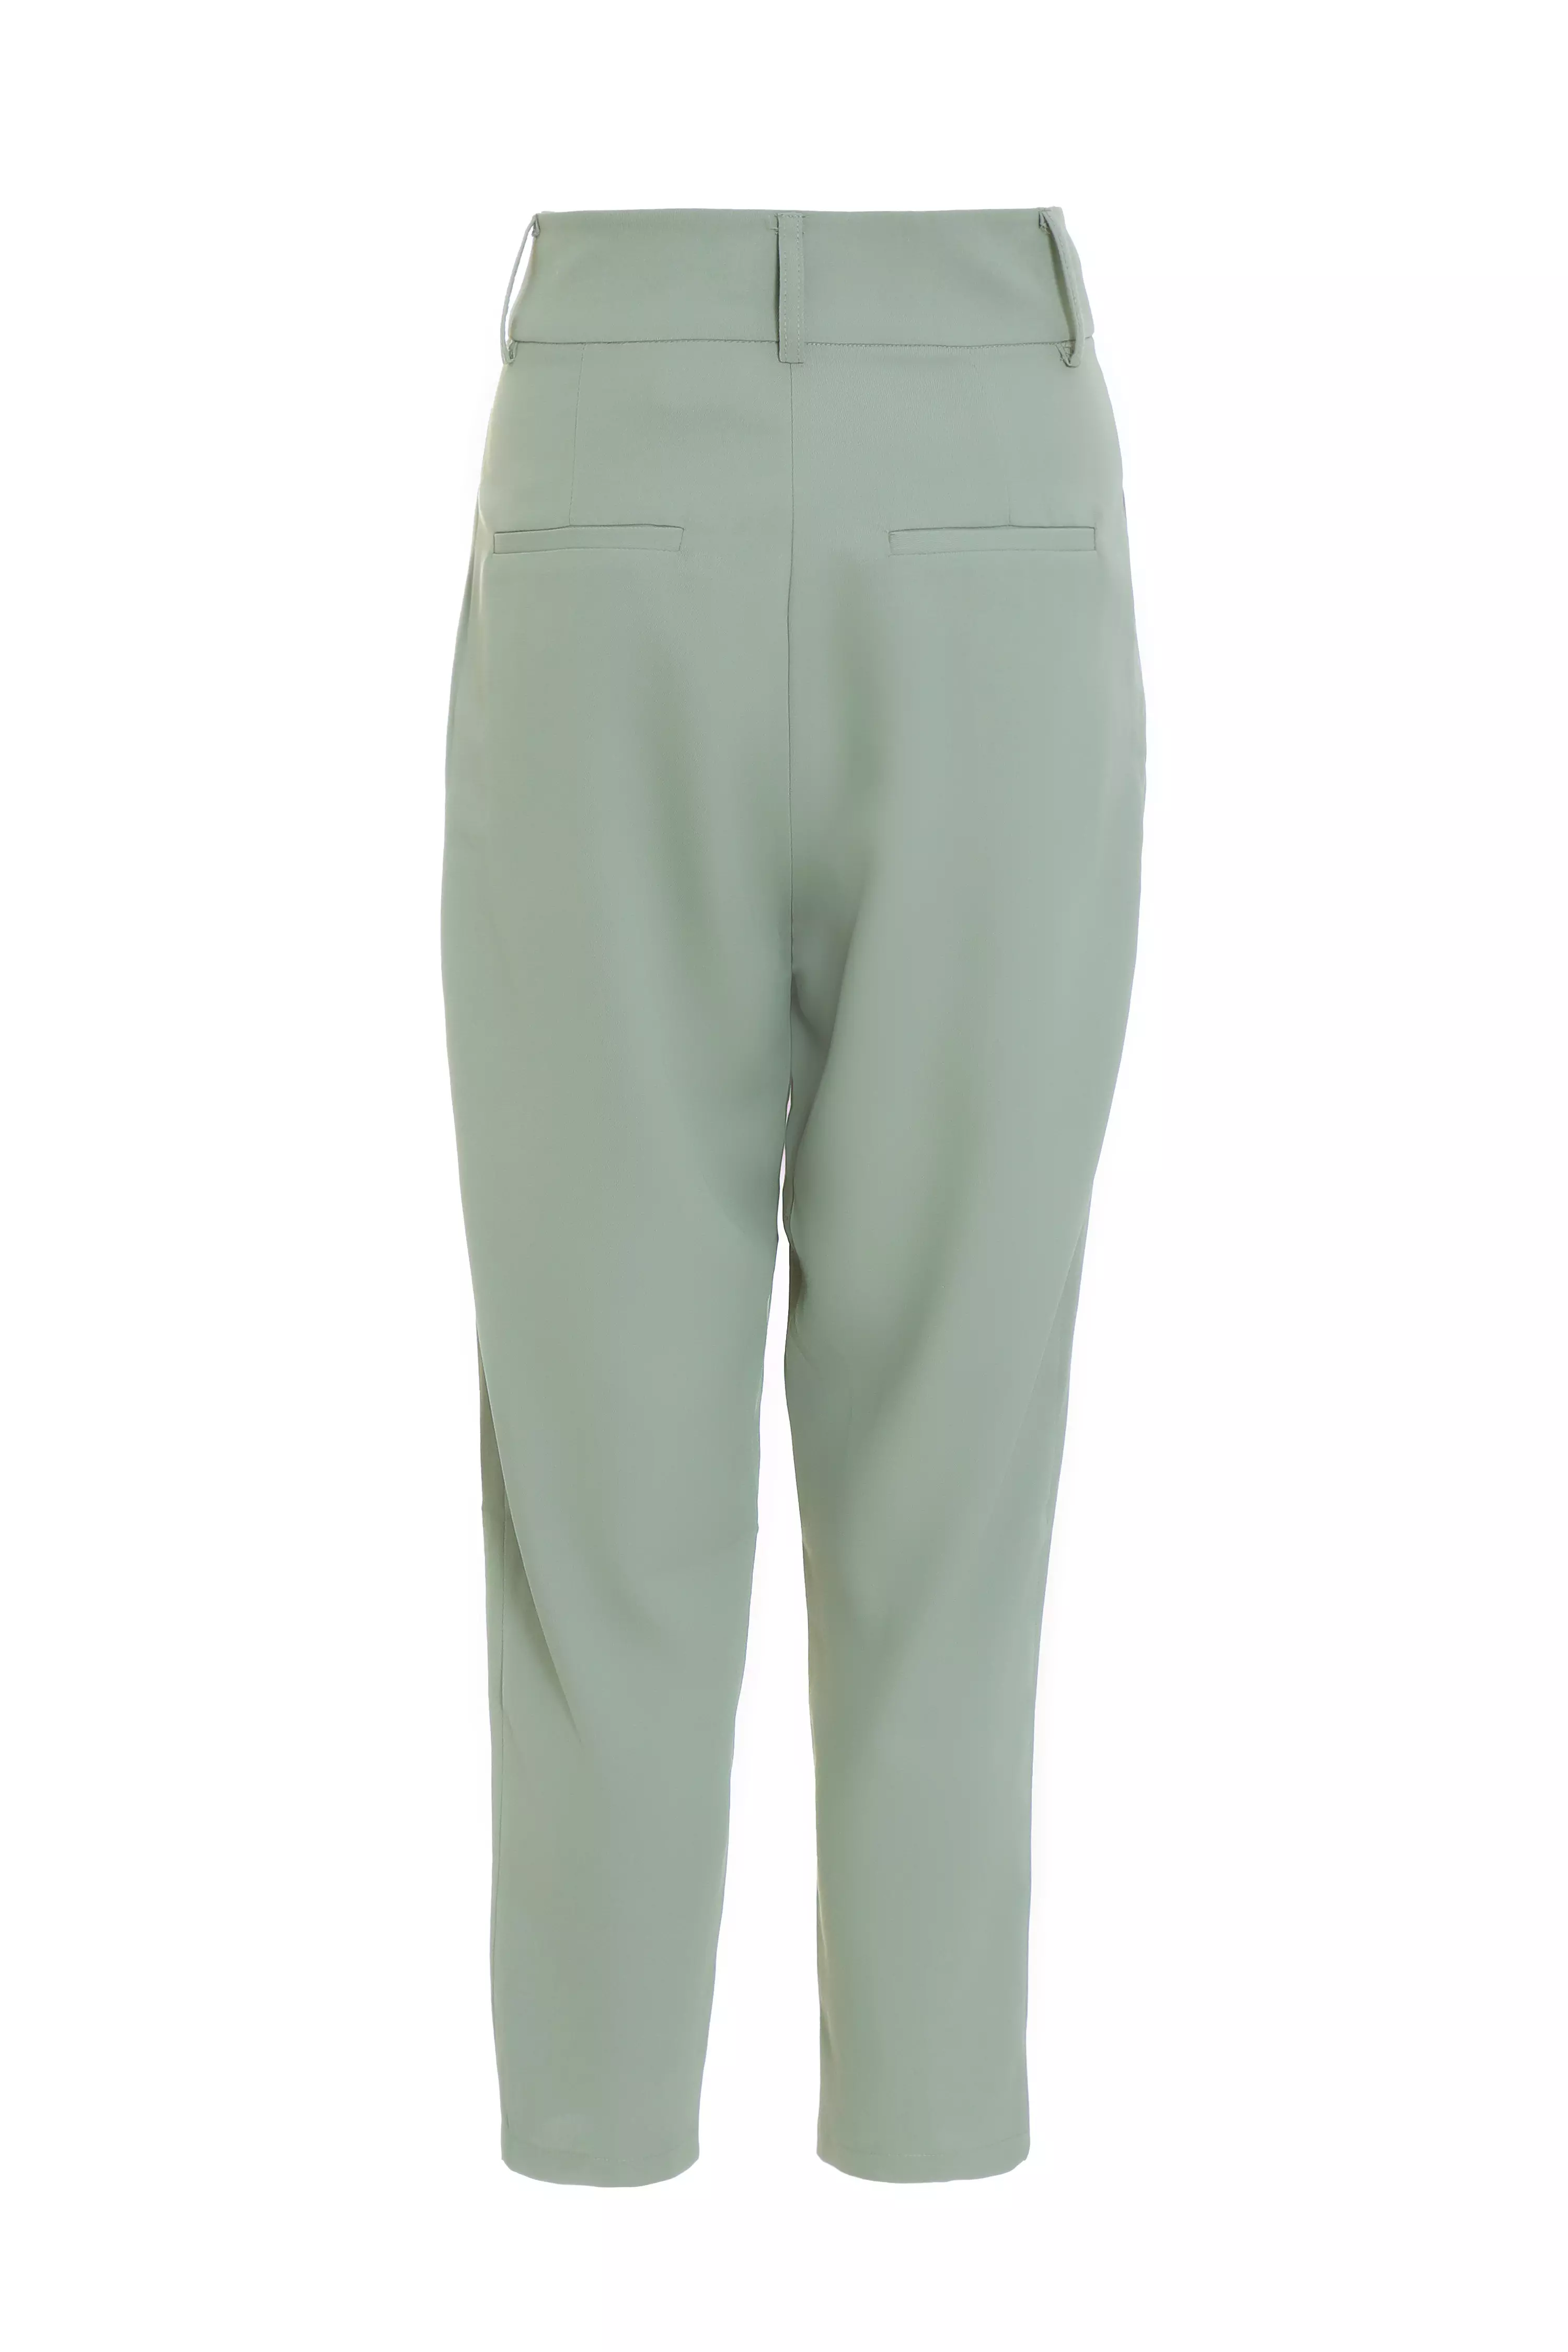 Khaki High Waisted Tapered Trousers<!-- --> - <!-- -->QUIZ Clothing